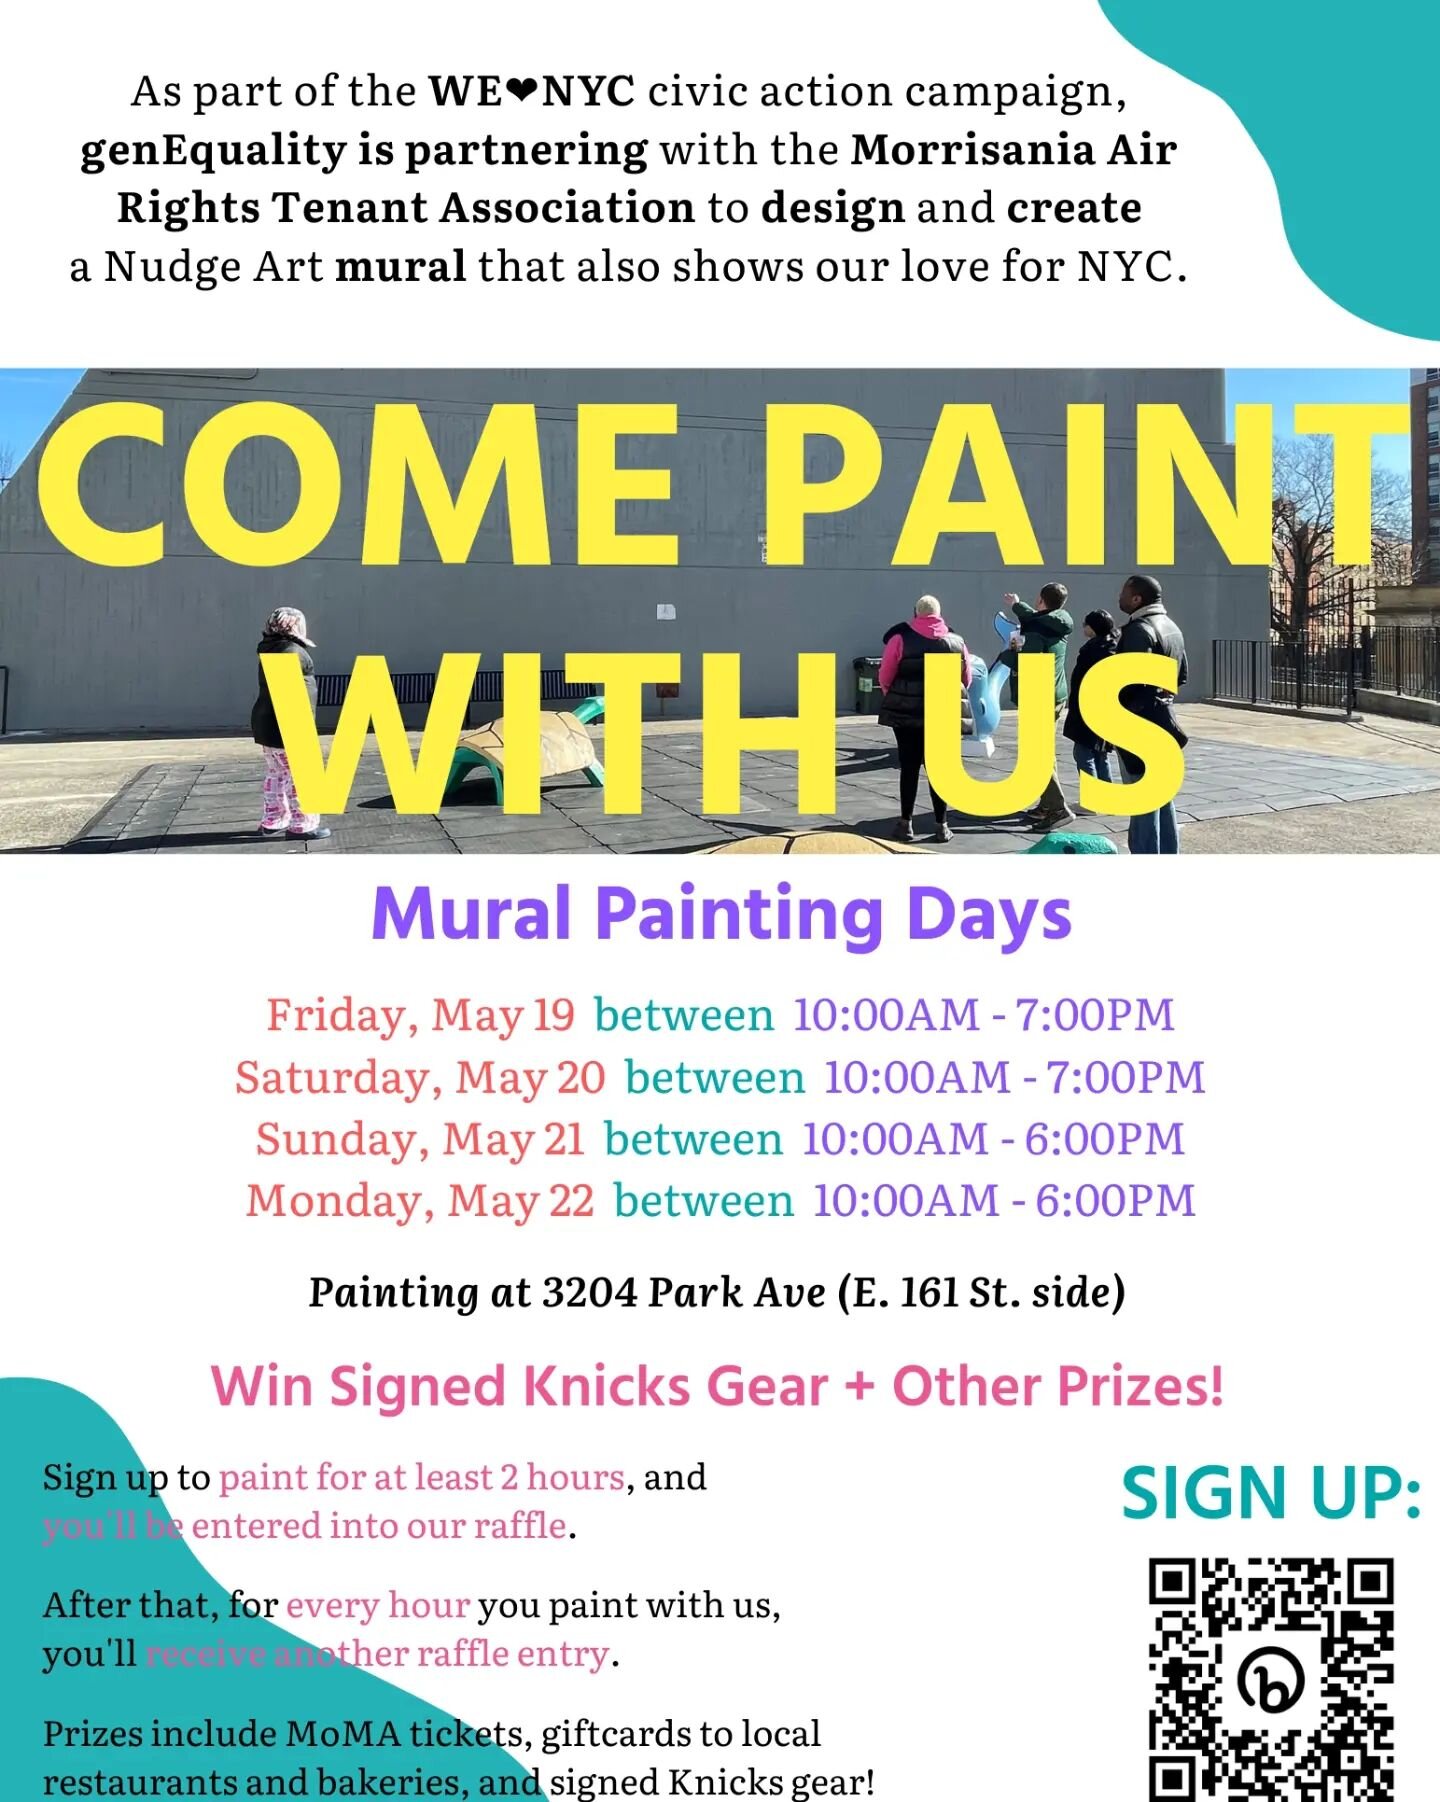 We are excited to partner with We Love NYC, genEquality, NYCHA and the Morrisania Air Rights Tenant Association to co-create the Morrisania Air Rights (MAR) Houses mural with the community, as part of the WeLoveNYC civic action campaign! 

This mural